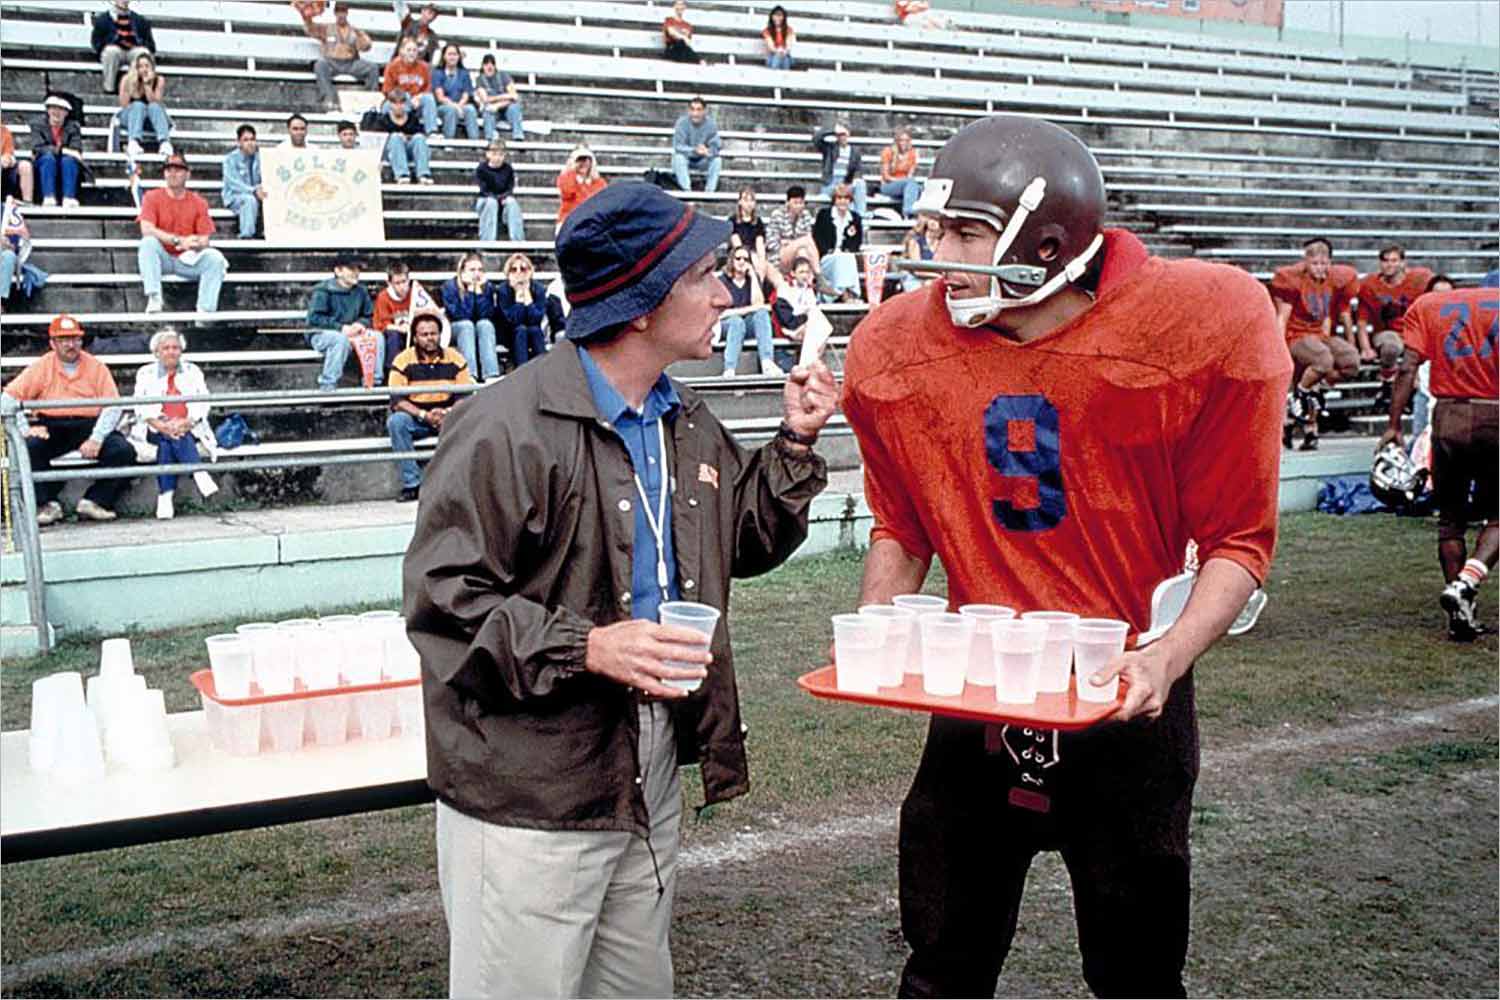 The Waterboy. 